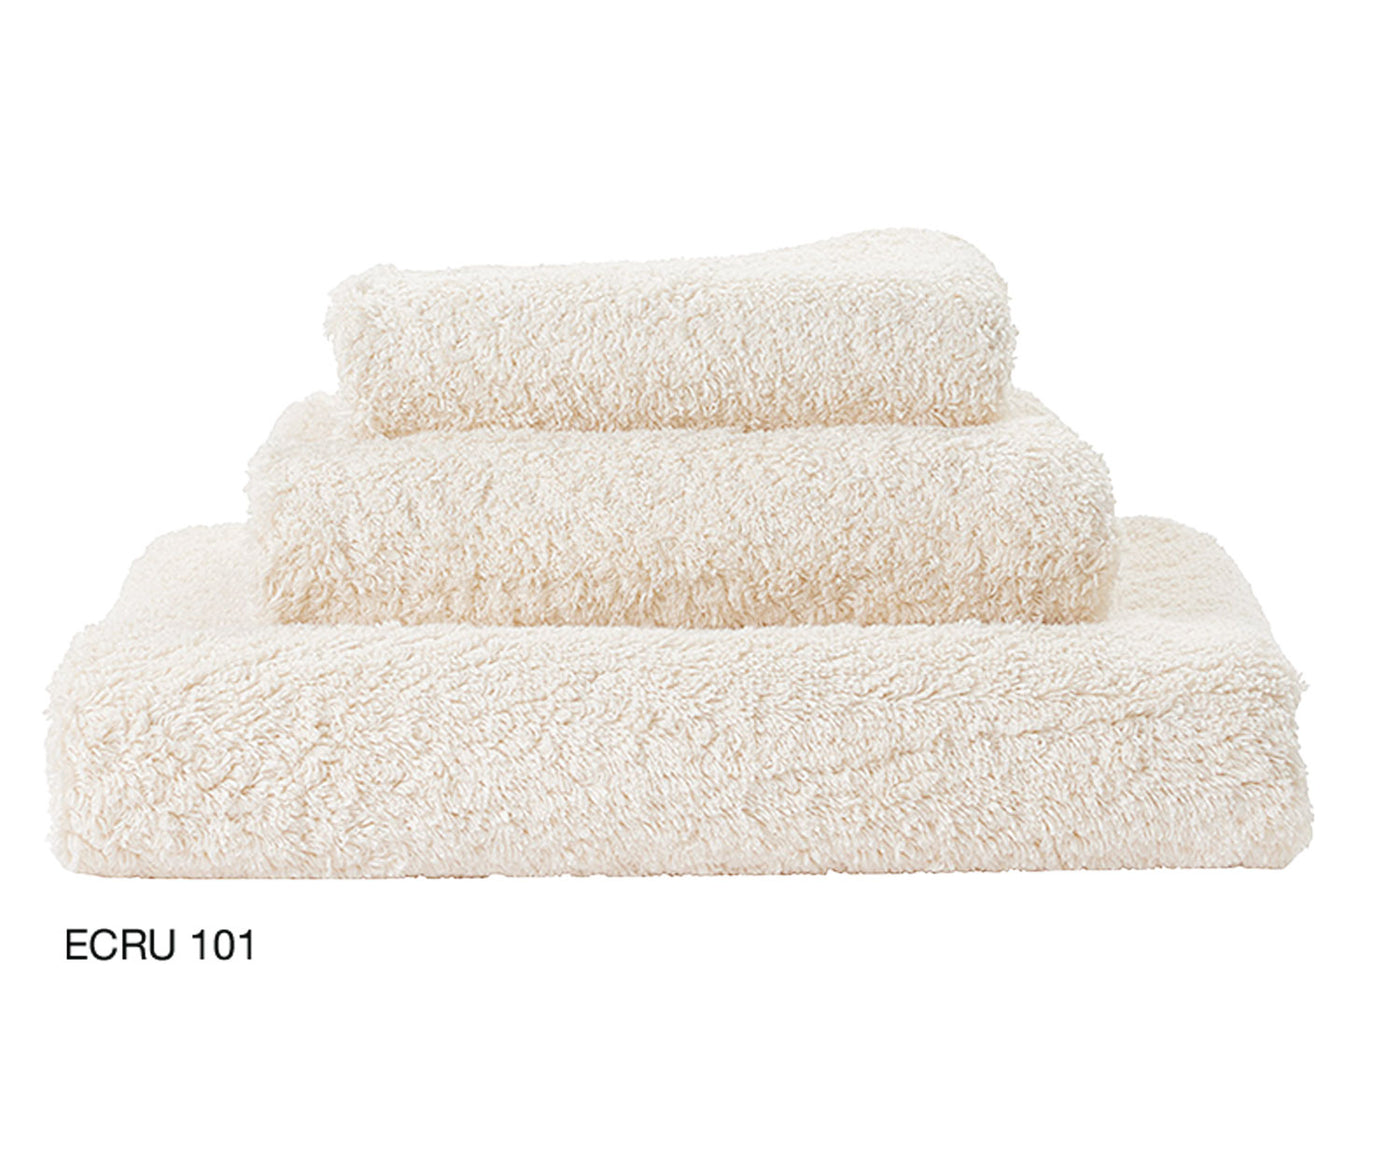 ABYSS & HABIDECOR SUPER PILE TOWEL COLLECTION (Colors 100-275)